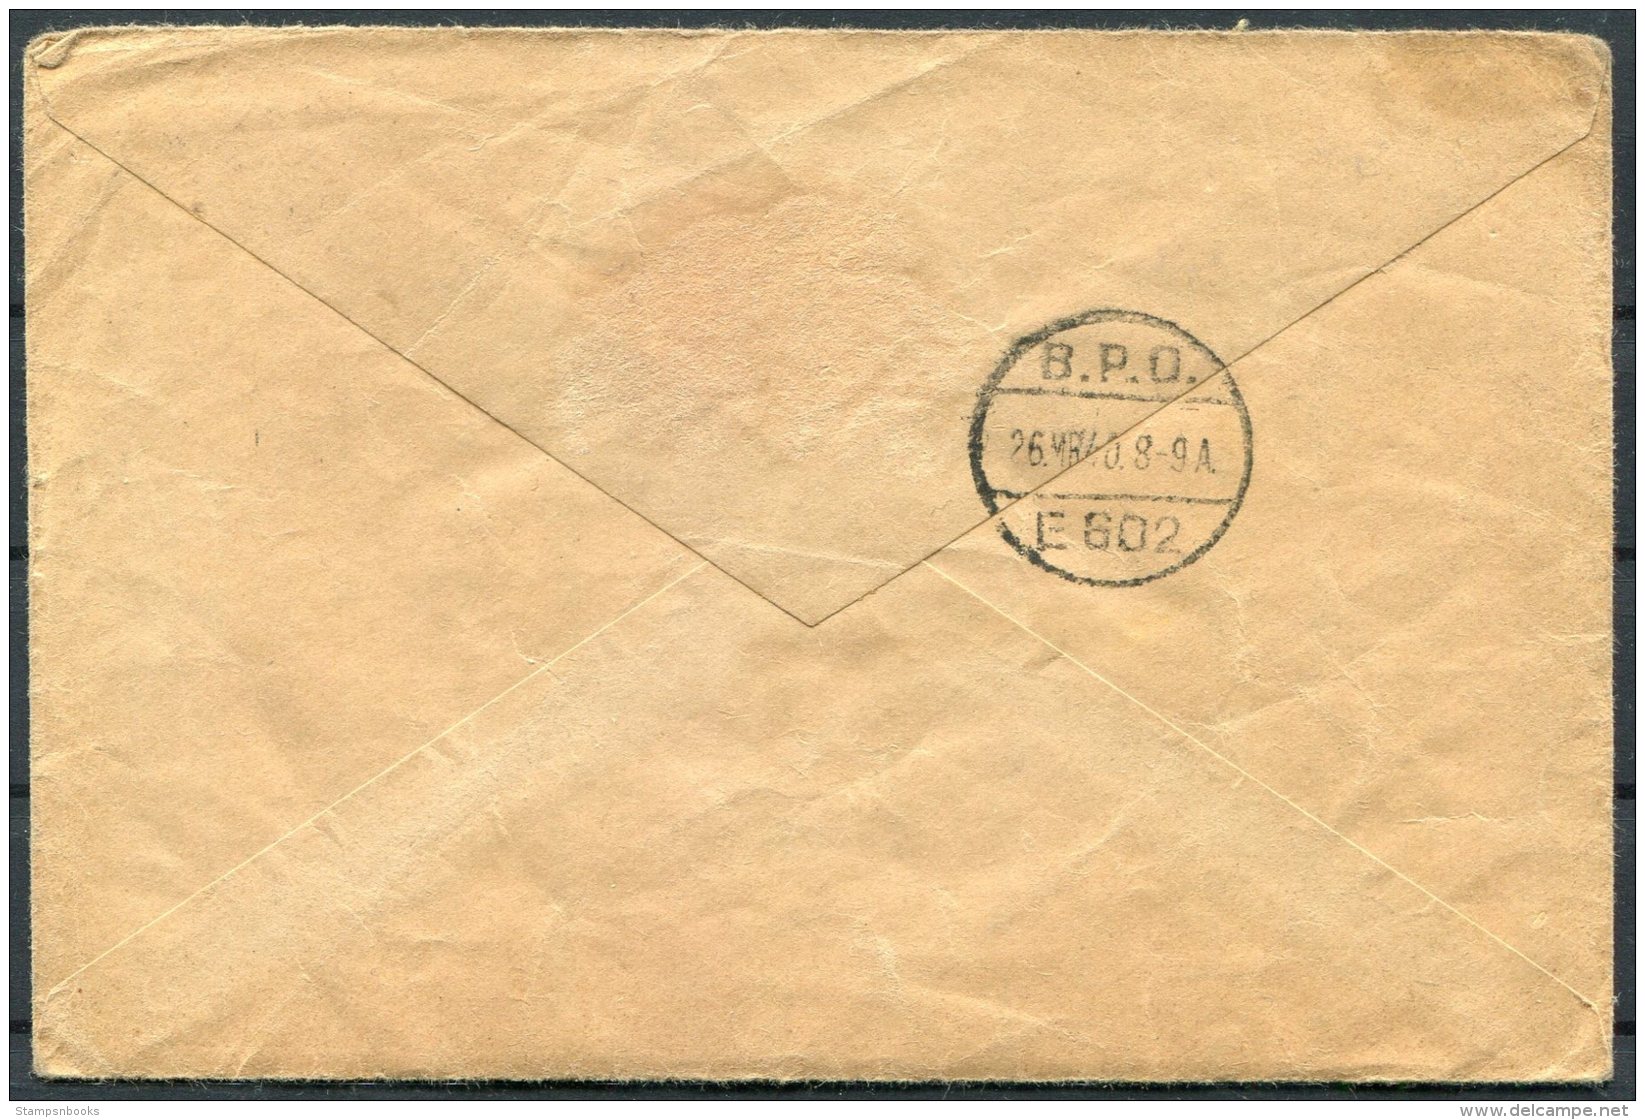 1940 Egypt Military Mail FPO Active Service Cover + Letter Rajput Regiment - Col. Iles, CBE DSO, Bedford Park,London - Covers & Documents